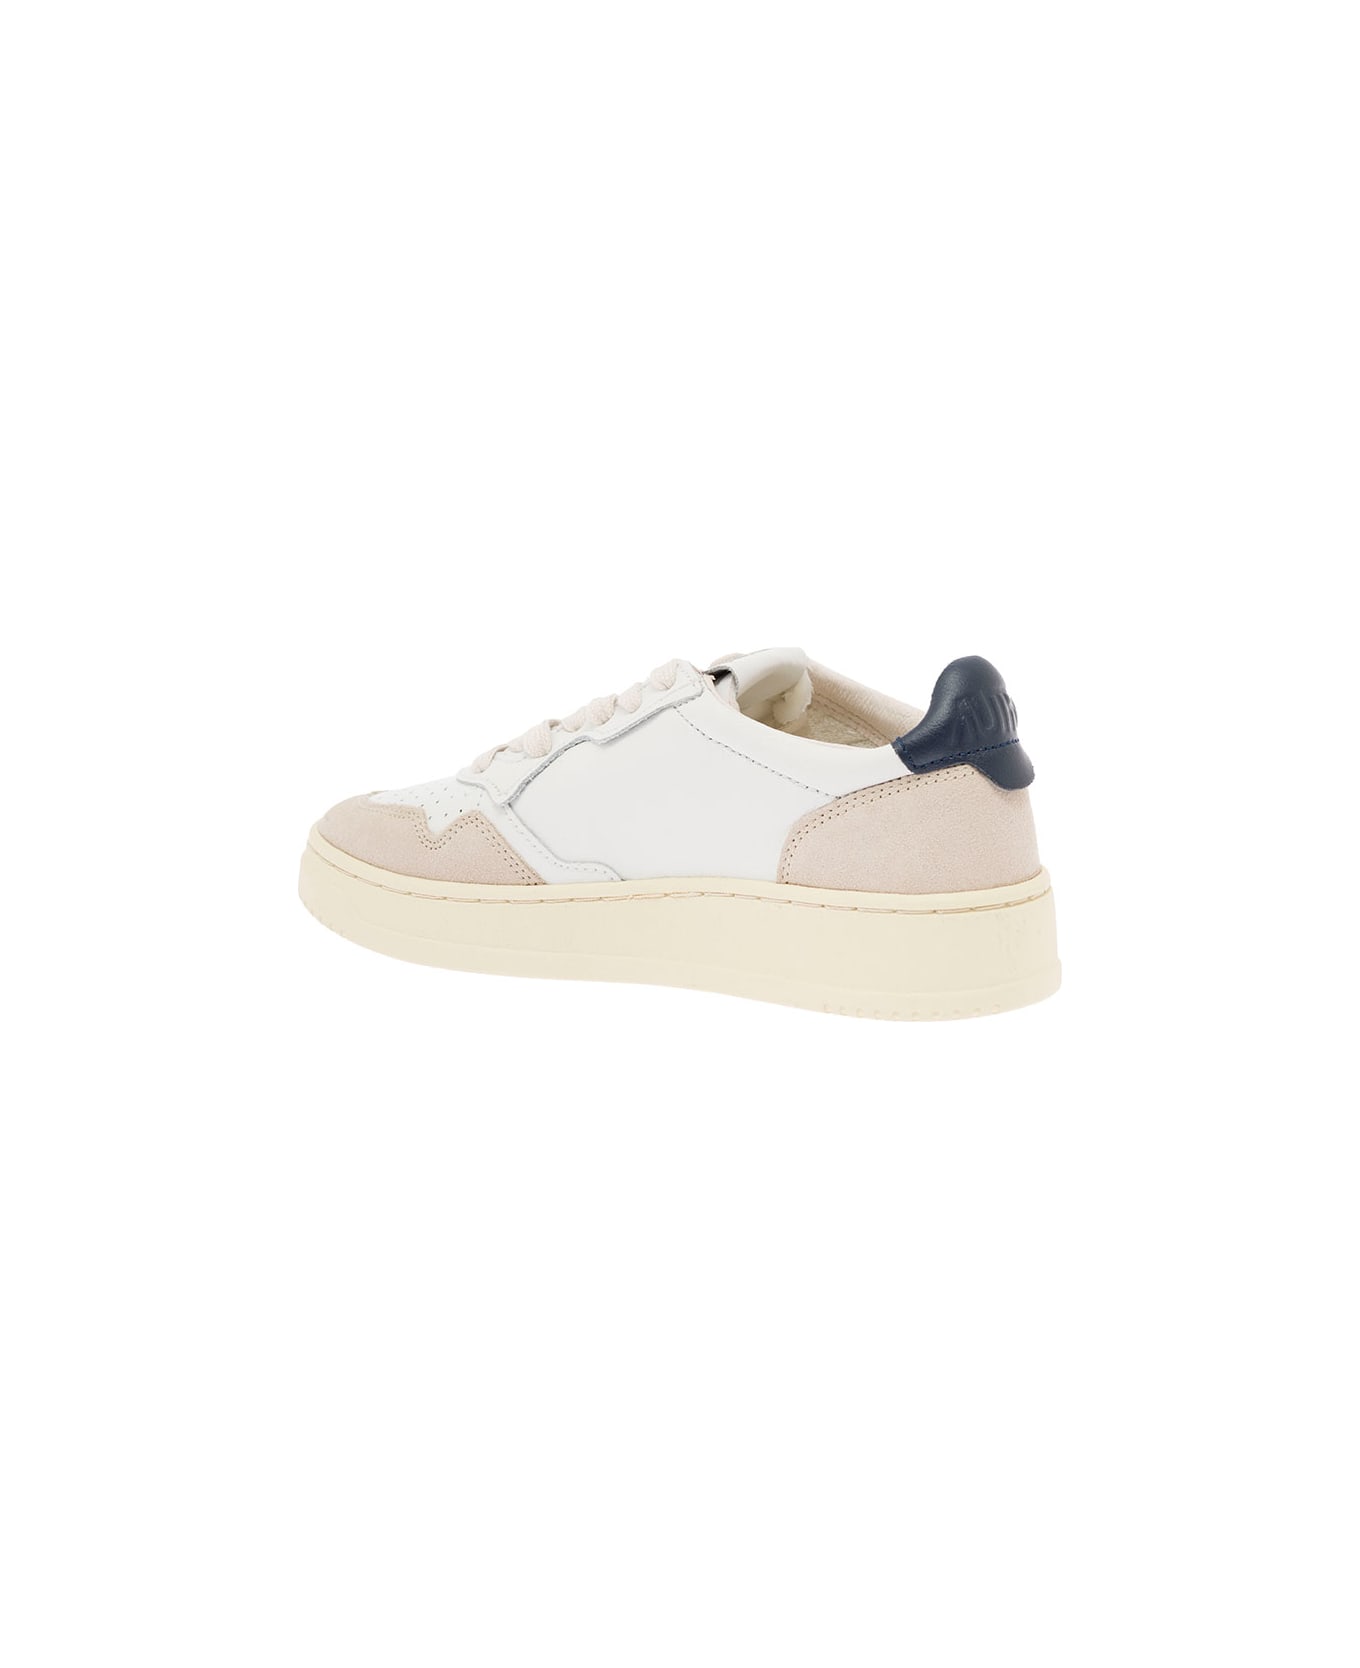 Autry Woman's Low White And Blue Leather And Suede Sneakers - White